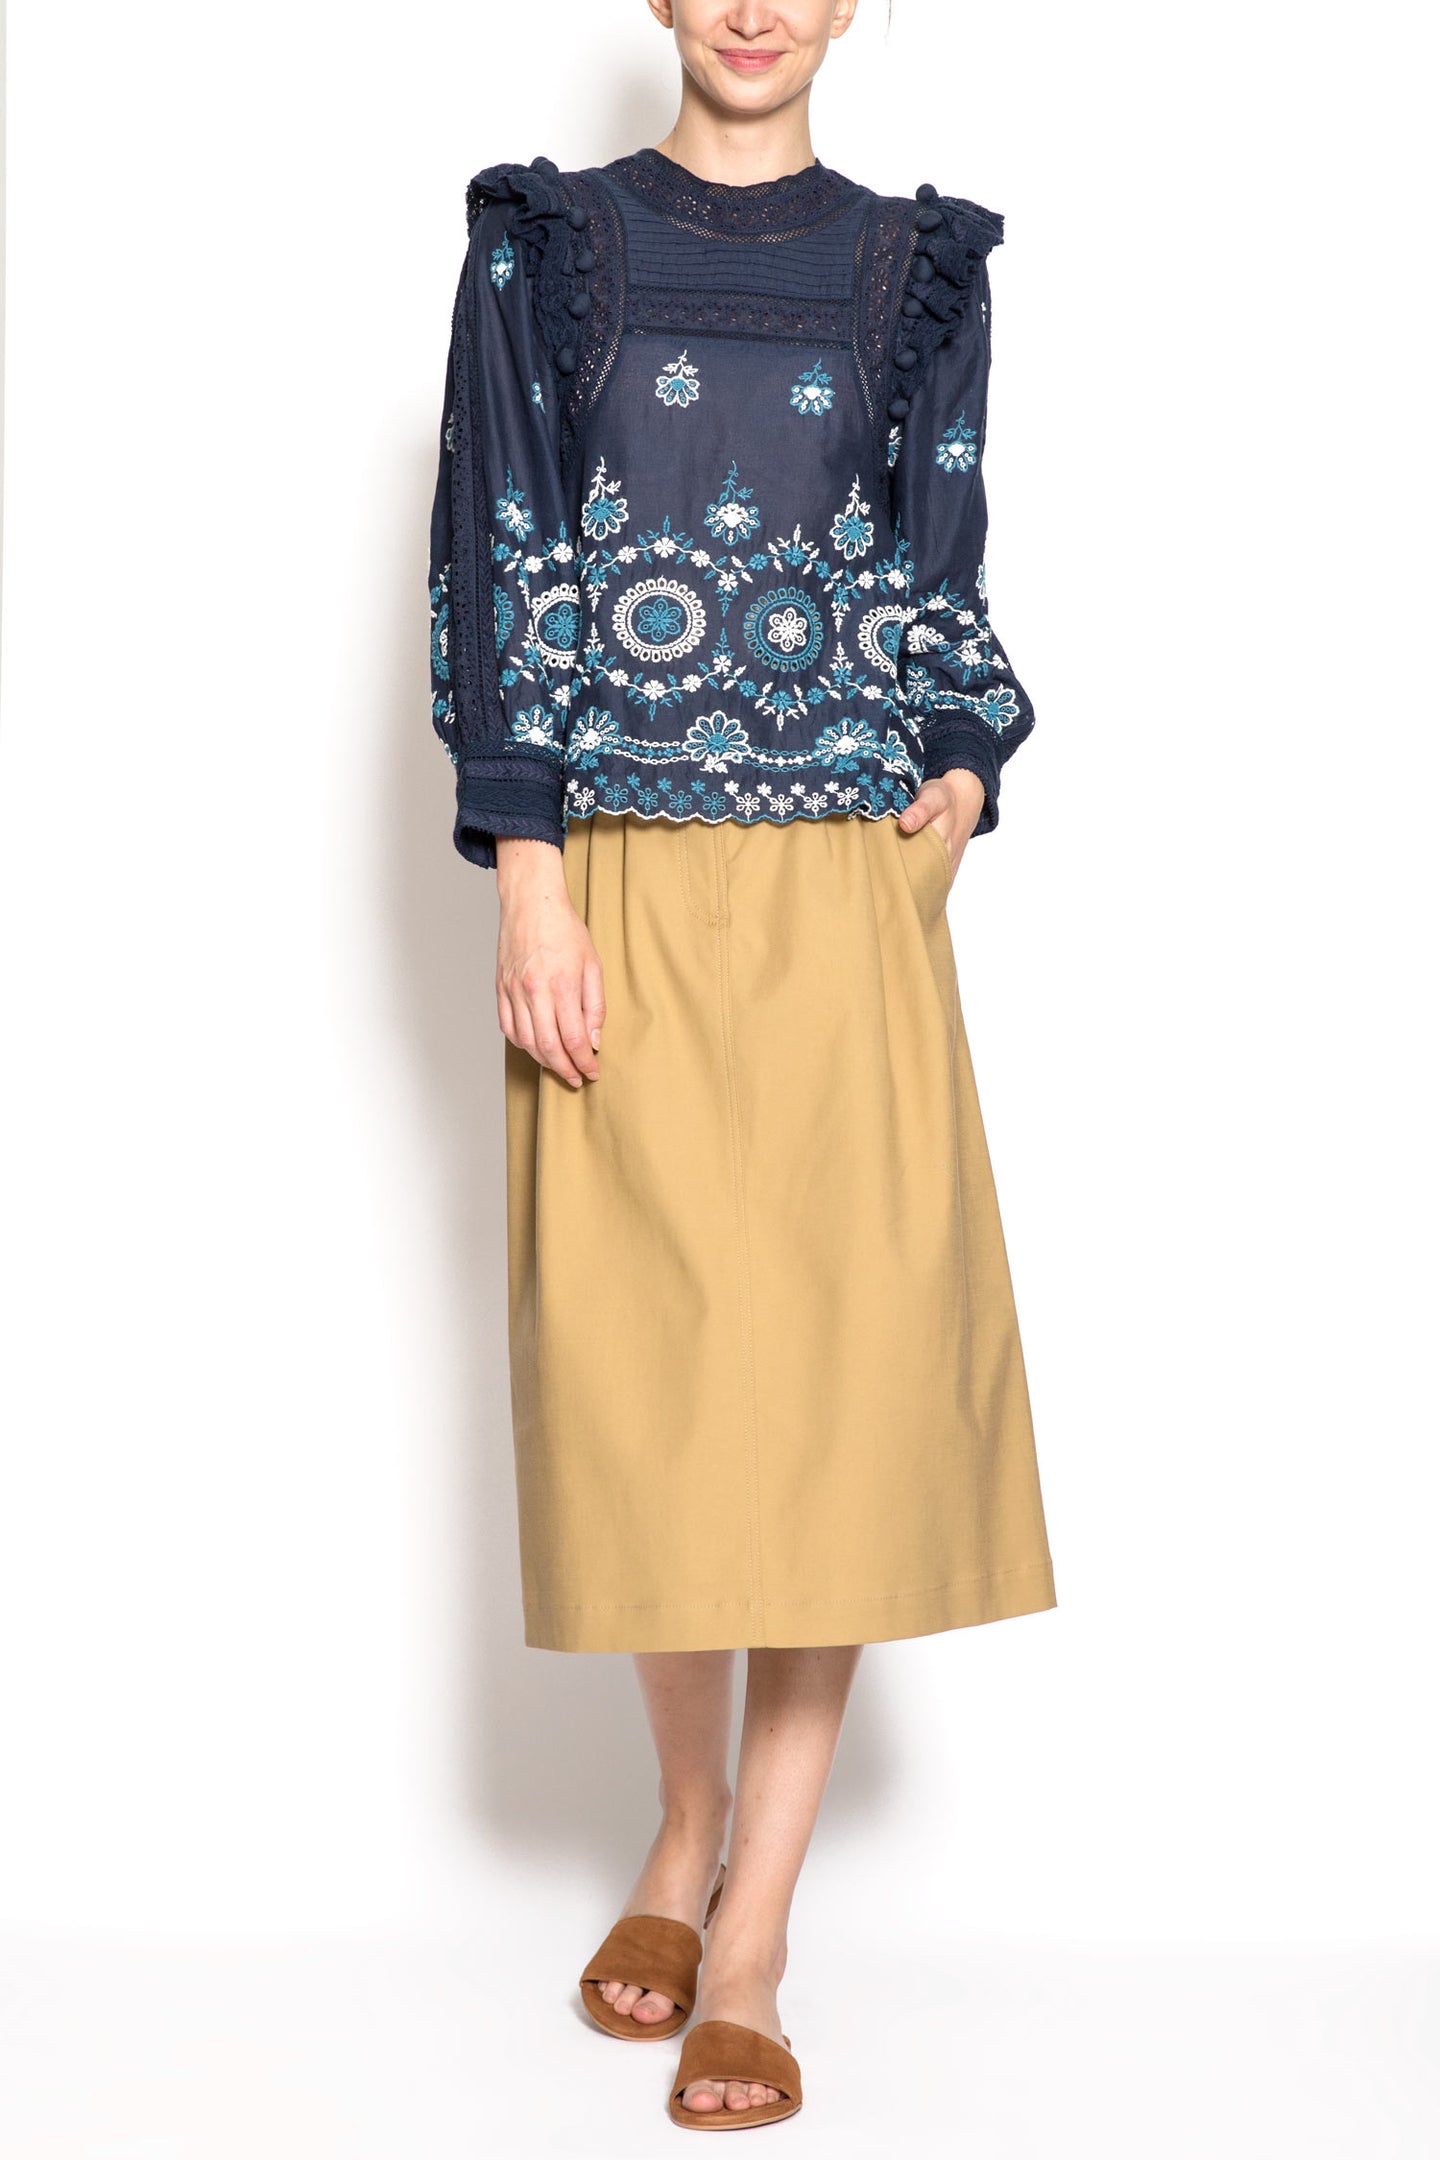 Sea NY elegant yet casual dresses, jackets, sweaters and accessories